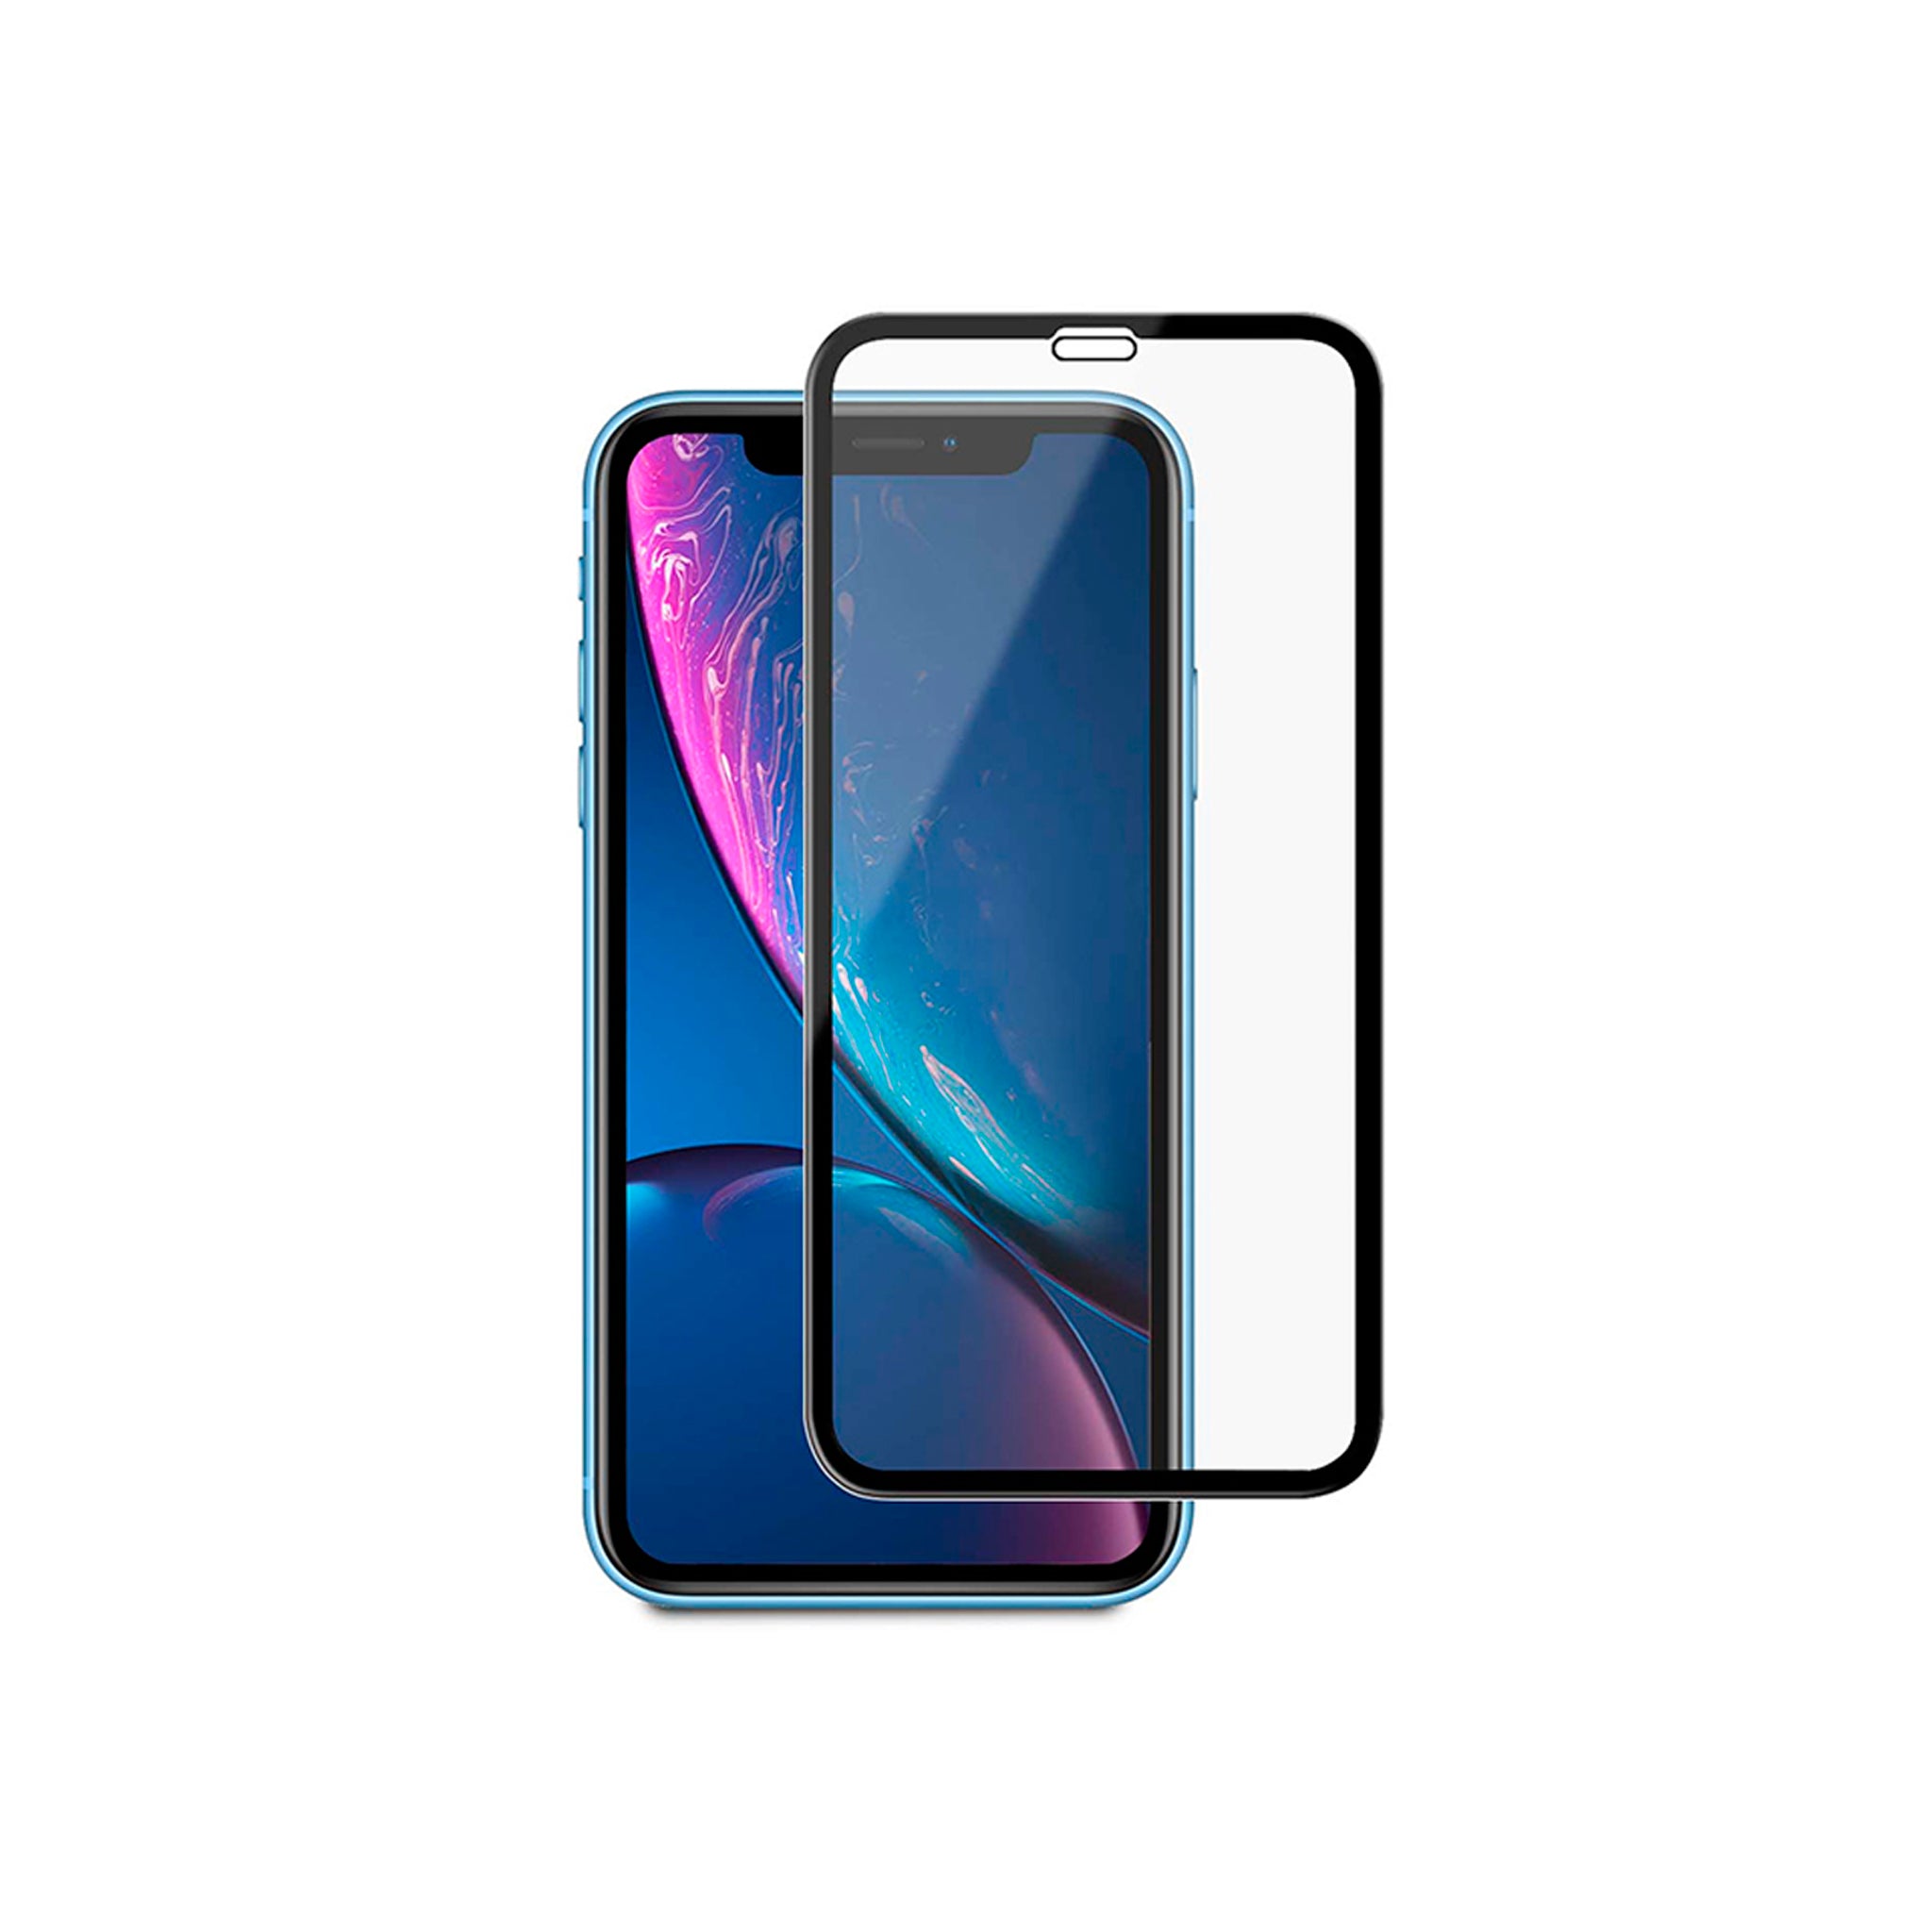 ArtsCase - Strong Shield Glass for Apple iPhone 11 / Xr (Full Screen Coverage glass)